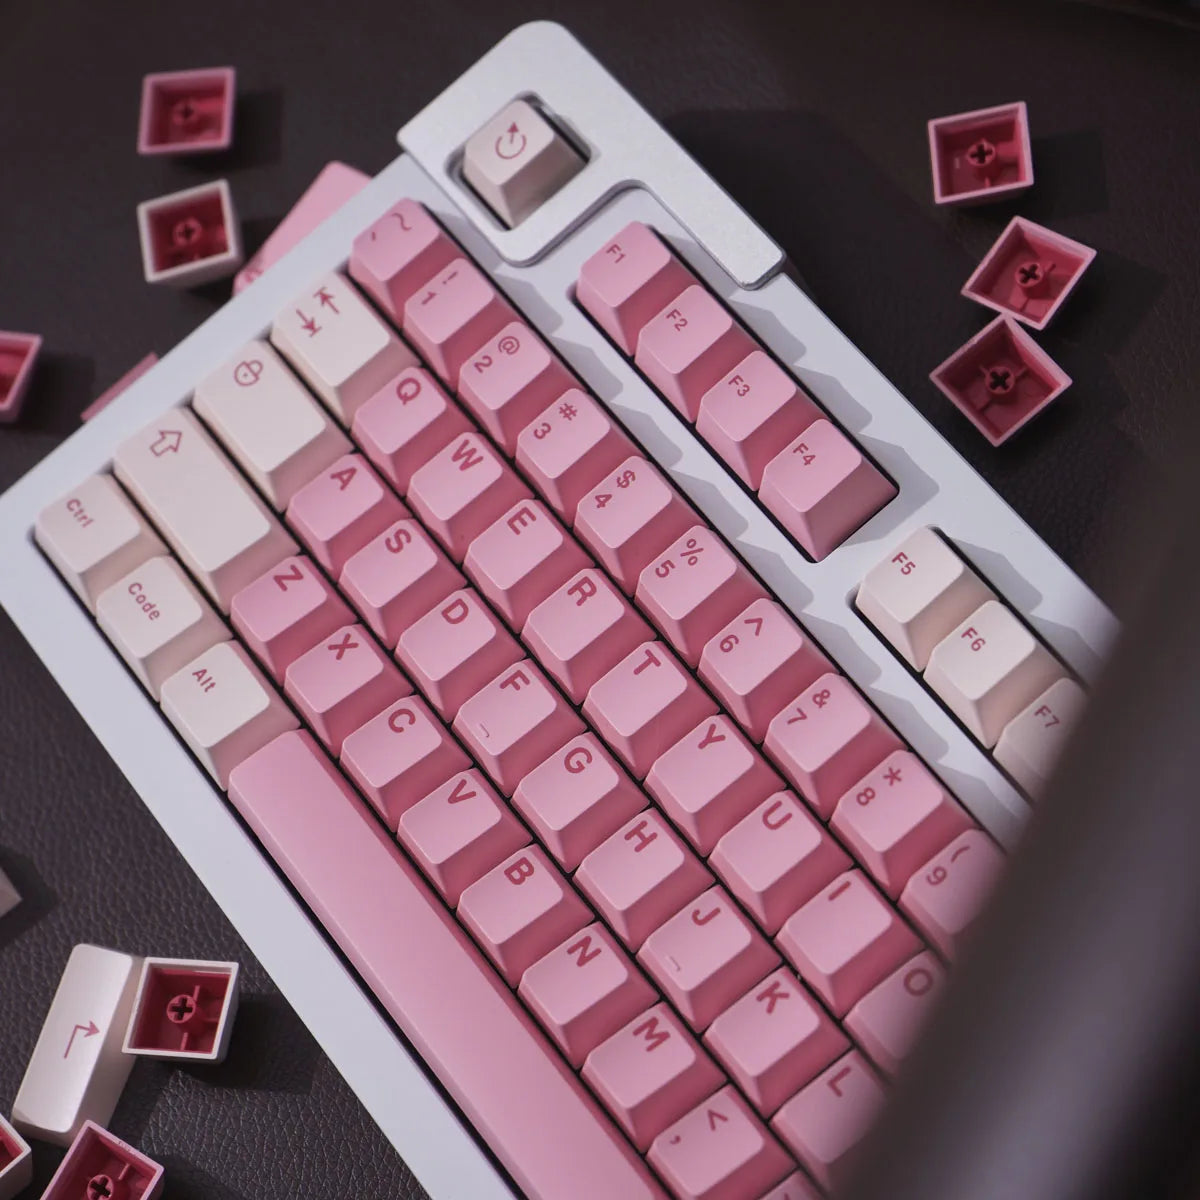 Two Color Ania Keycaps (Cherry Profile)